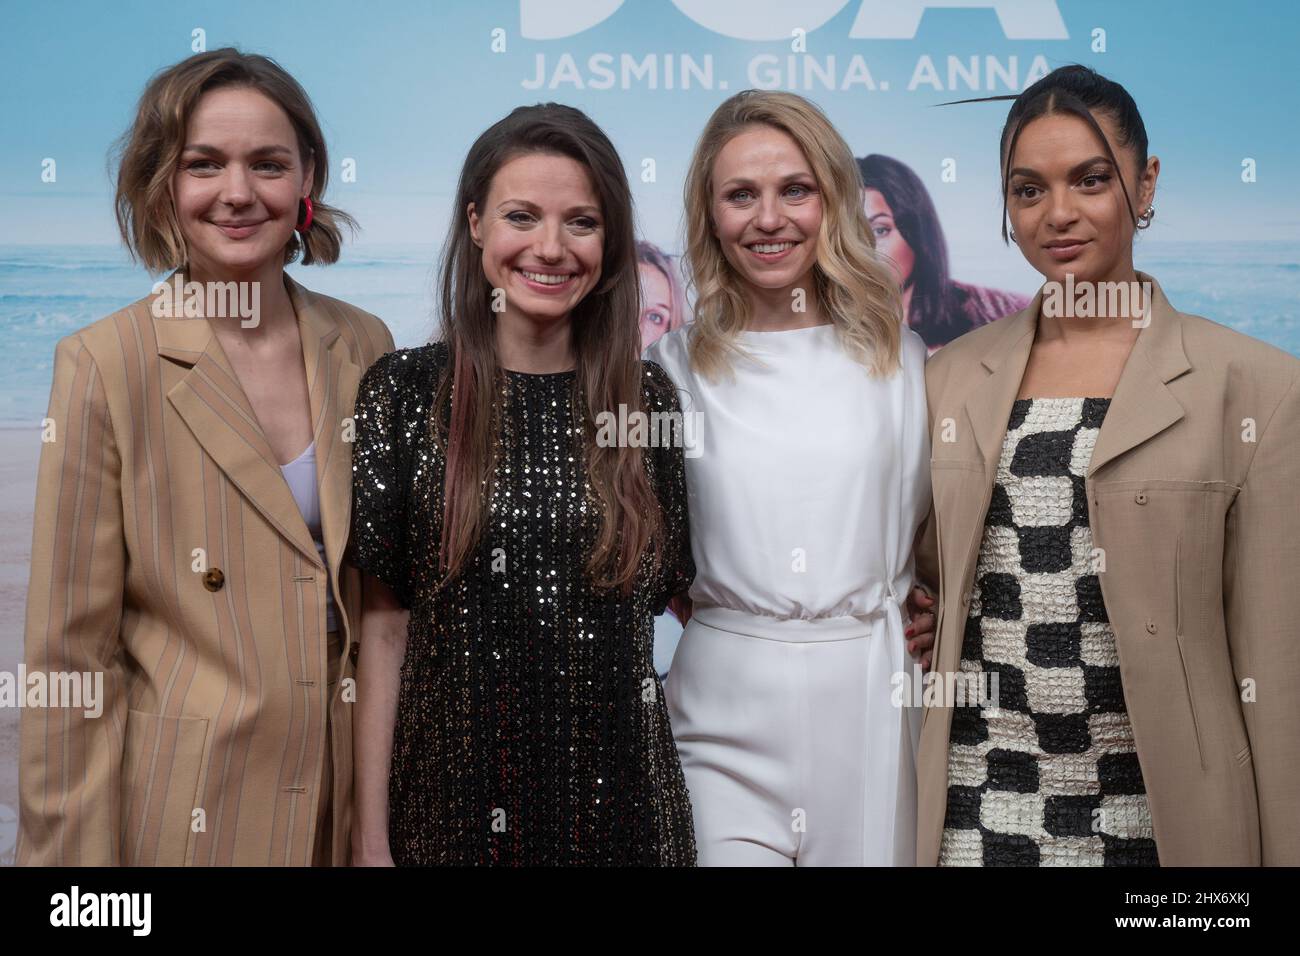 Munich, Germany. 09th Mar, 2022. Luise Heyer, Julia Hartmann, Teresa Rizos and Taneshia Abt on the Red Carpet. On March 9, 2022, the premiere of the film 'JGA Jasmin Gina Anna' took place at the Mathaeser in Munich. (Photo by Alexander Pohl/Sipa USA) Credit: Sipa USA/Alamy Live News Stock Photo